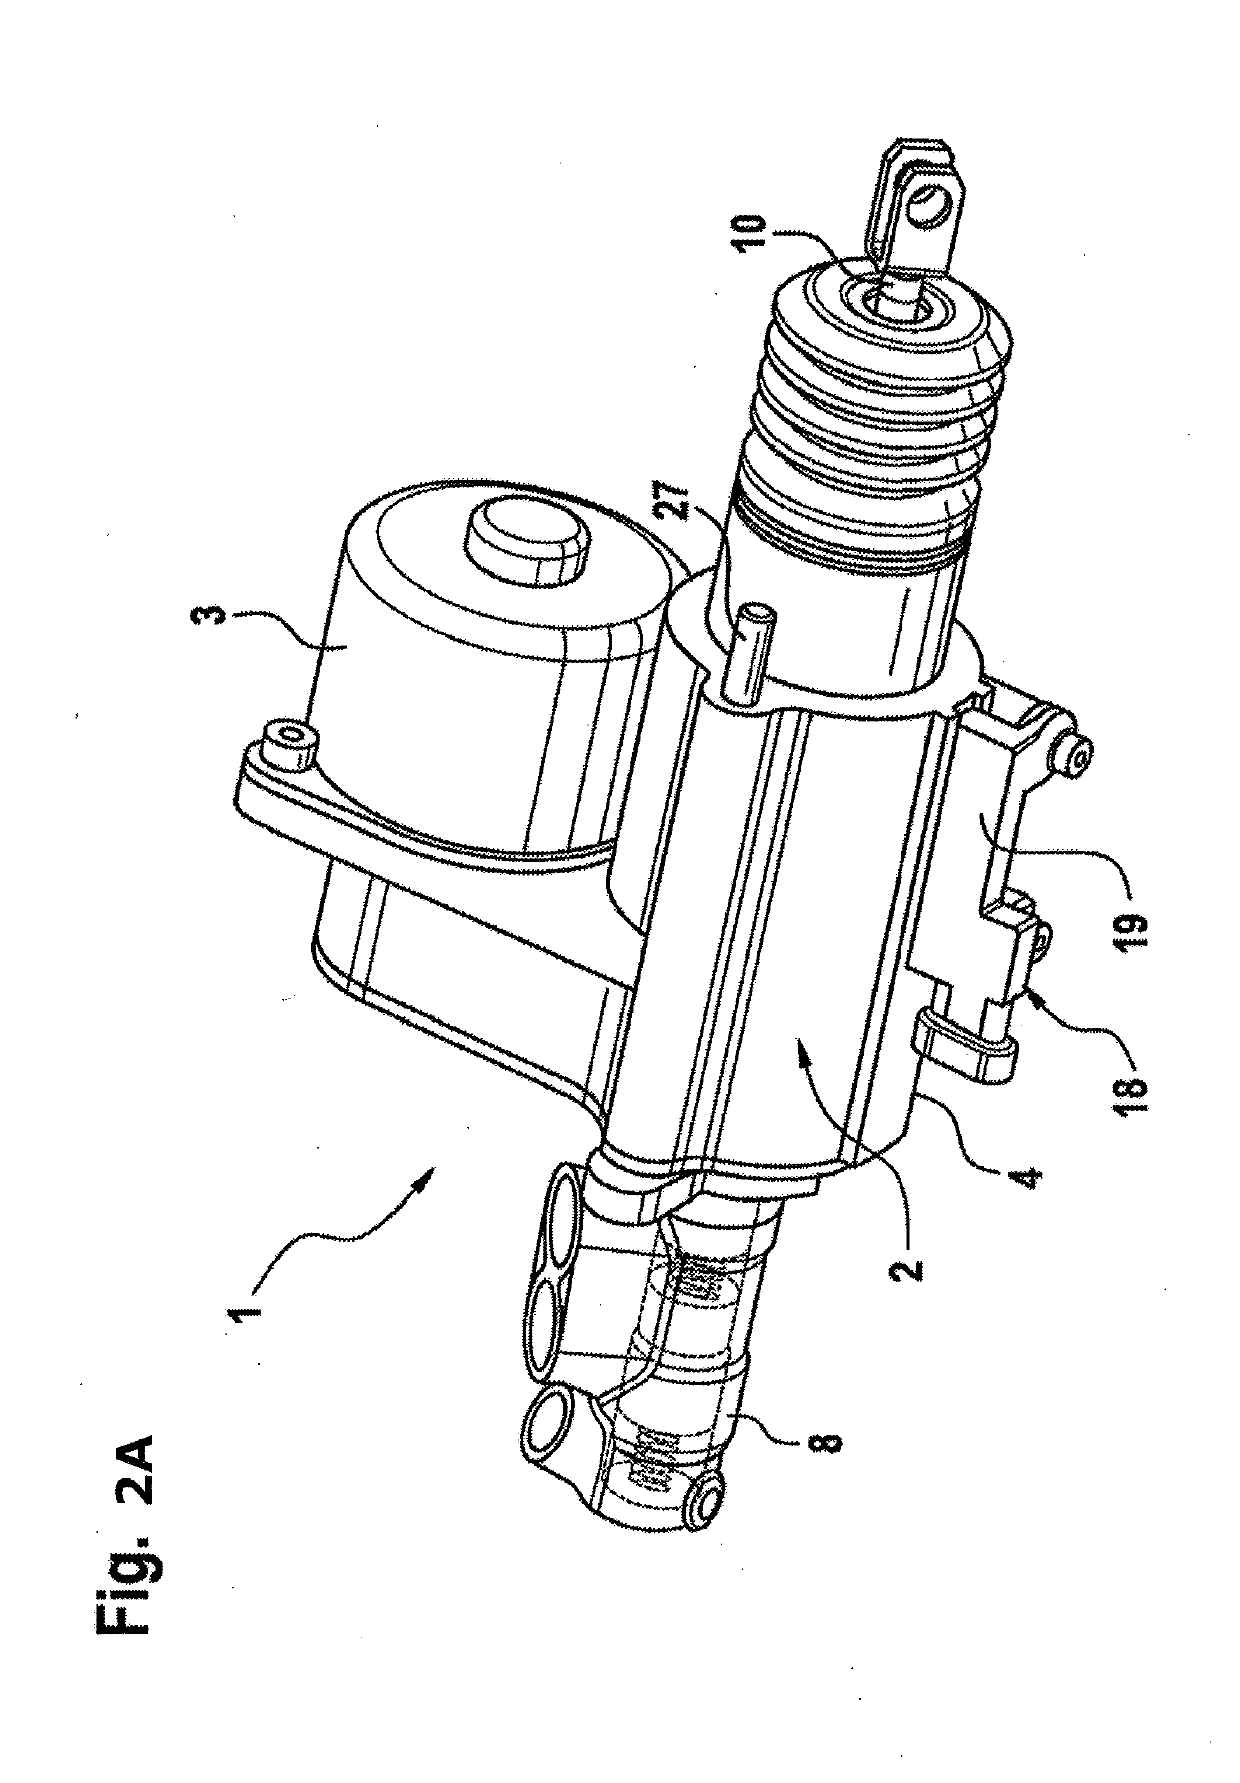 Braking device for a hydraulic motor vehicle braking system having a ball screw drive